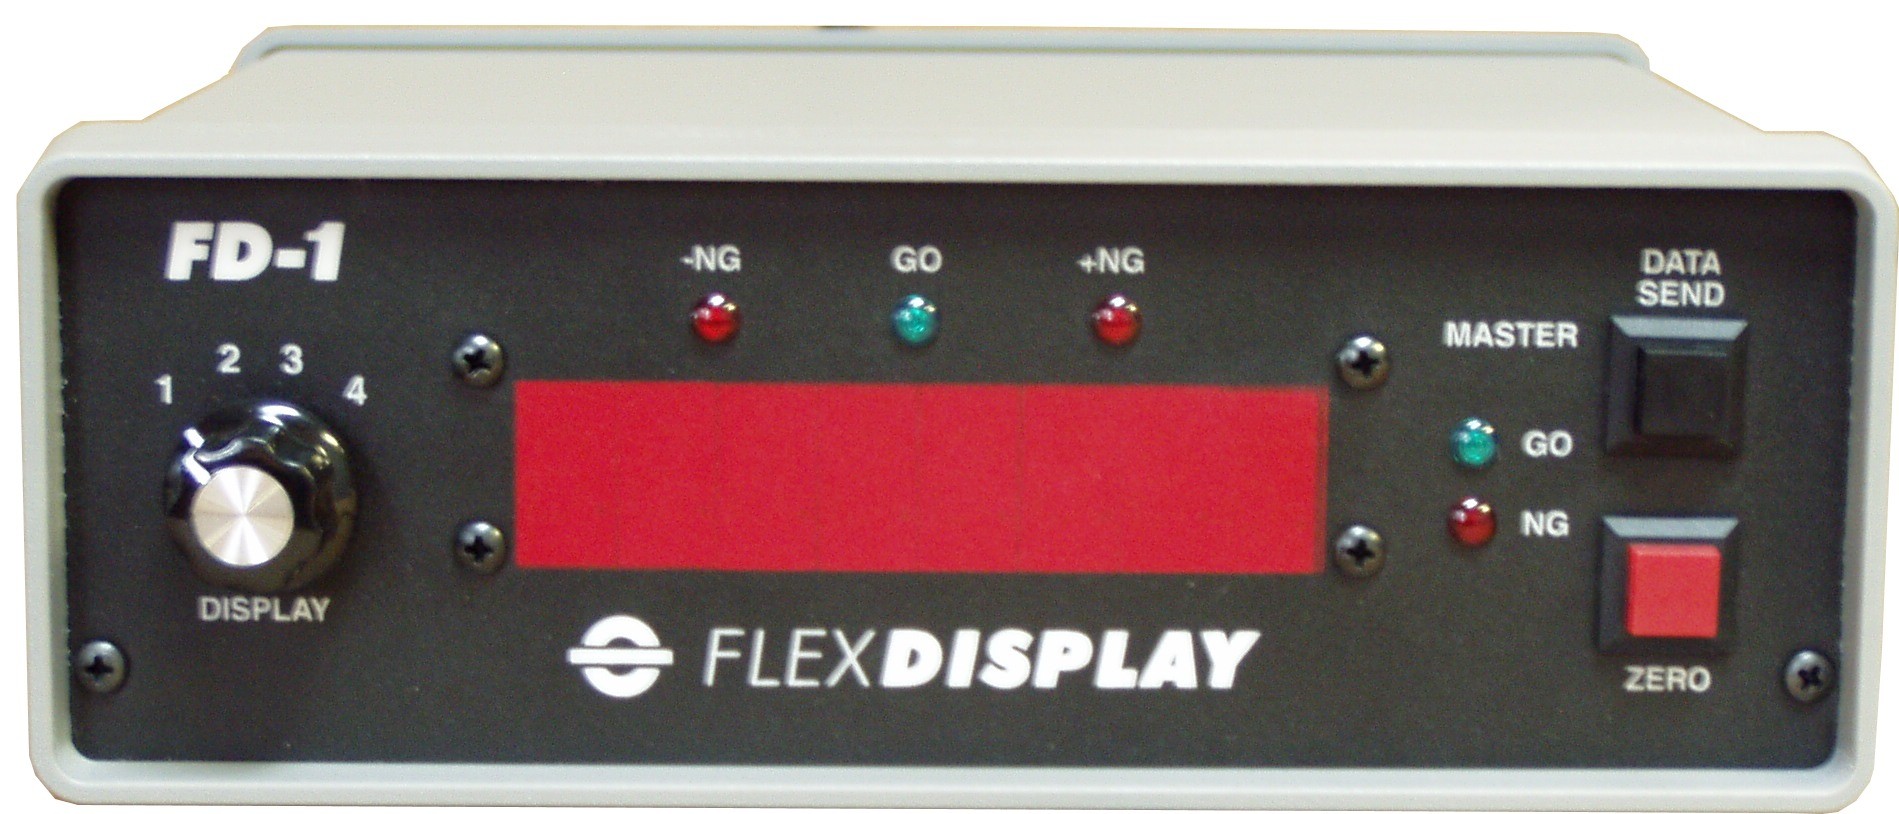 FlexDisplay Gage Interface & Remote Display FD-1 (Front)